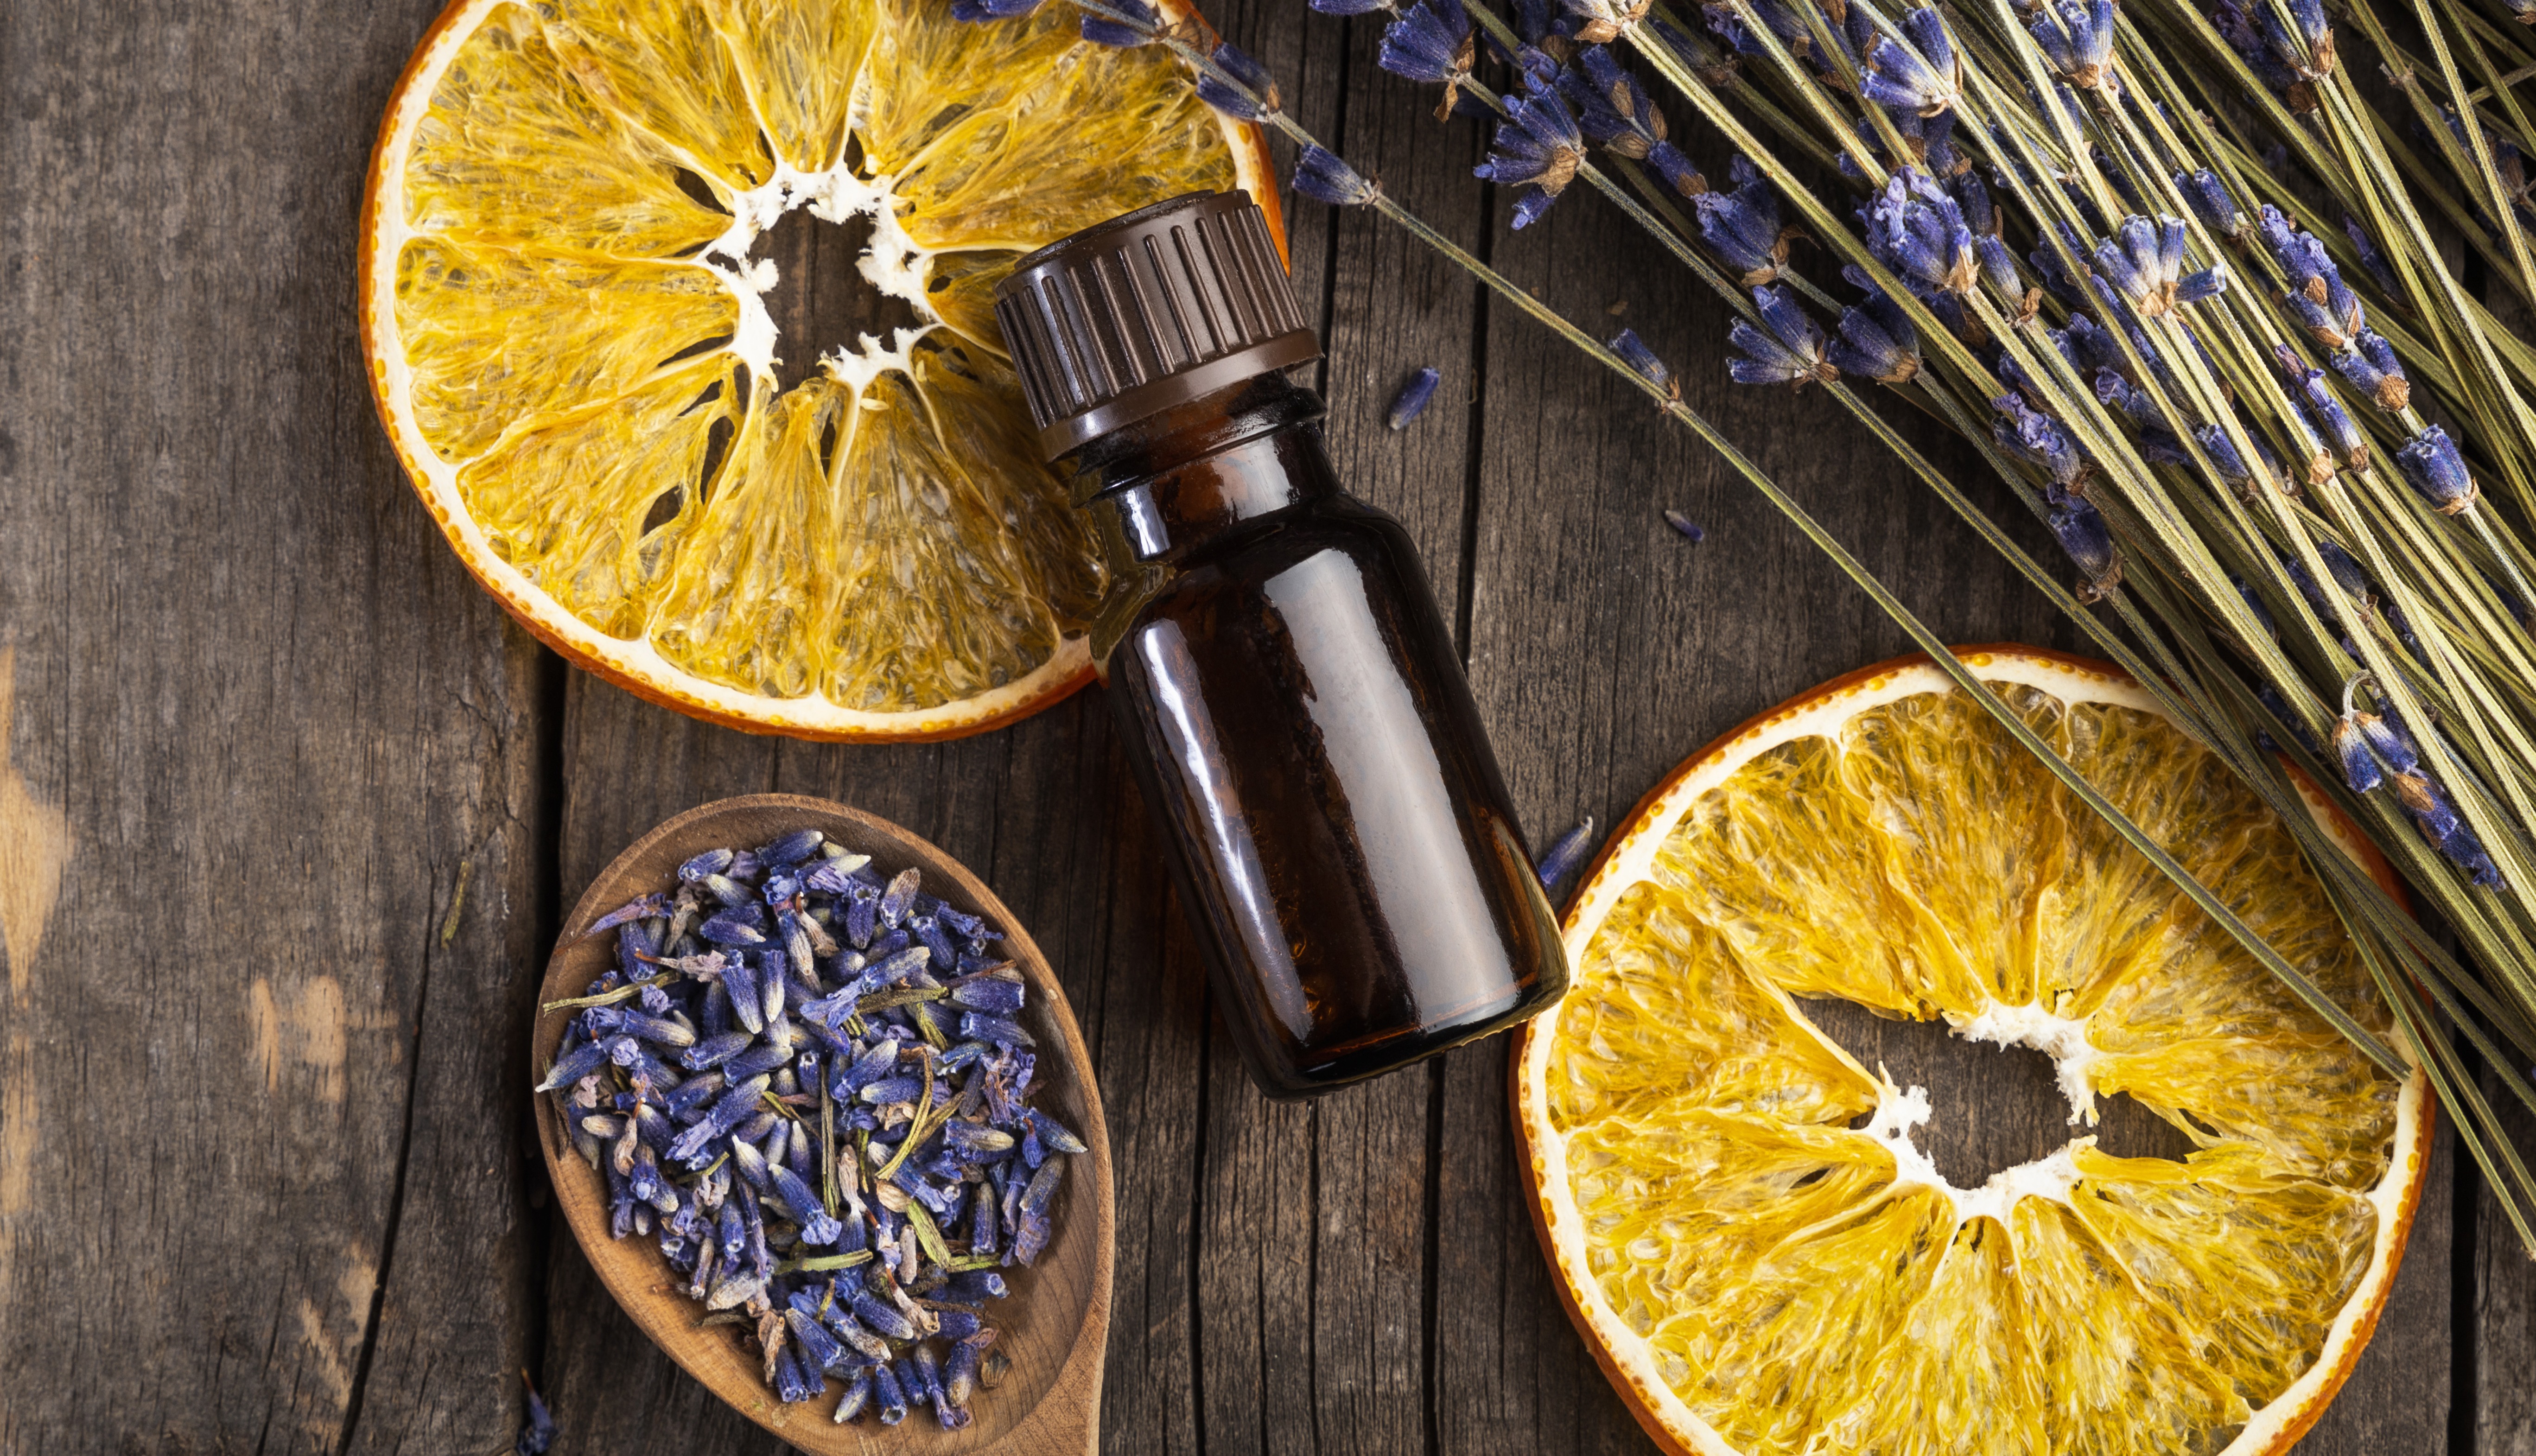 5 Useful Things You Can Make With Essential Oils Cover Photo